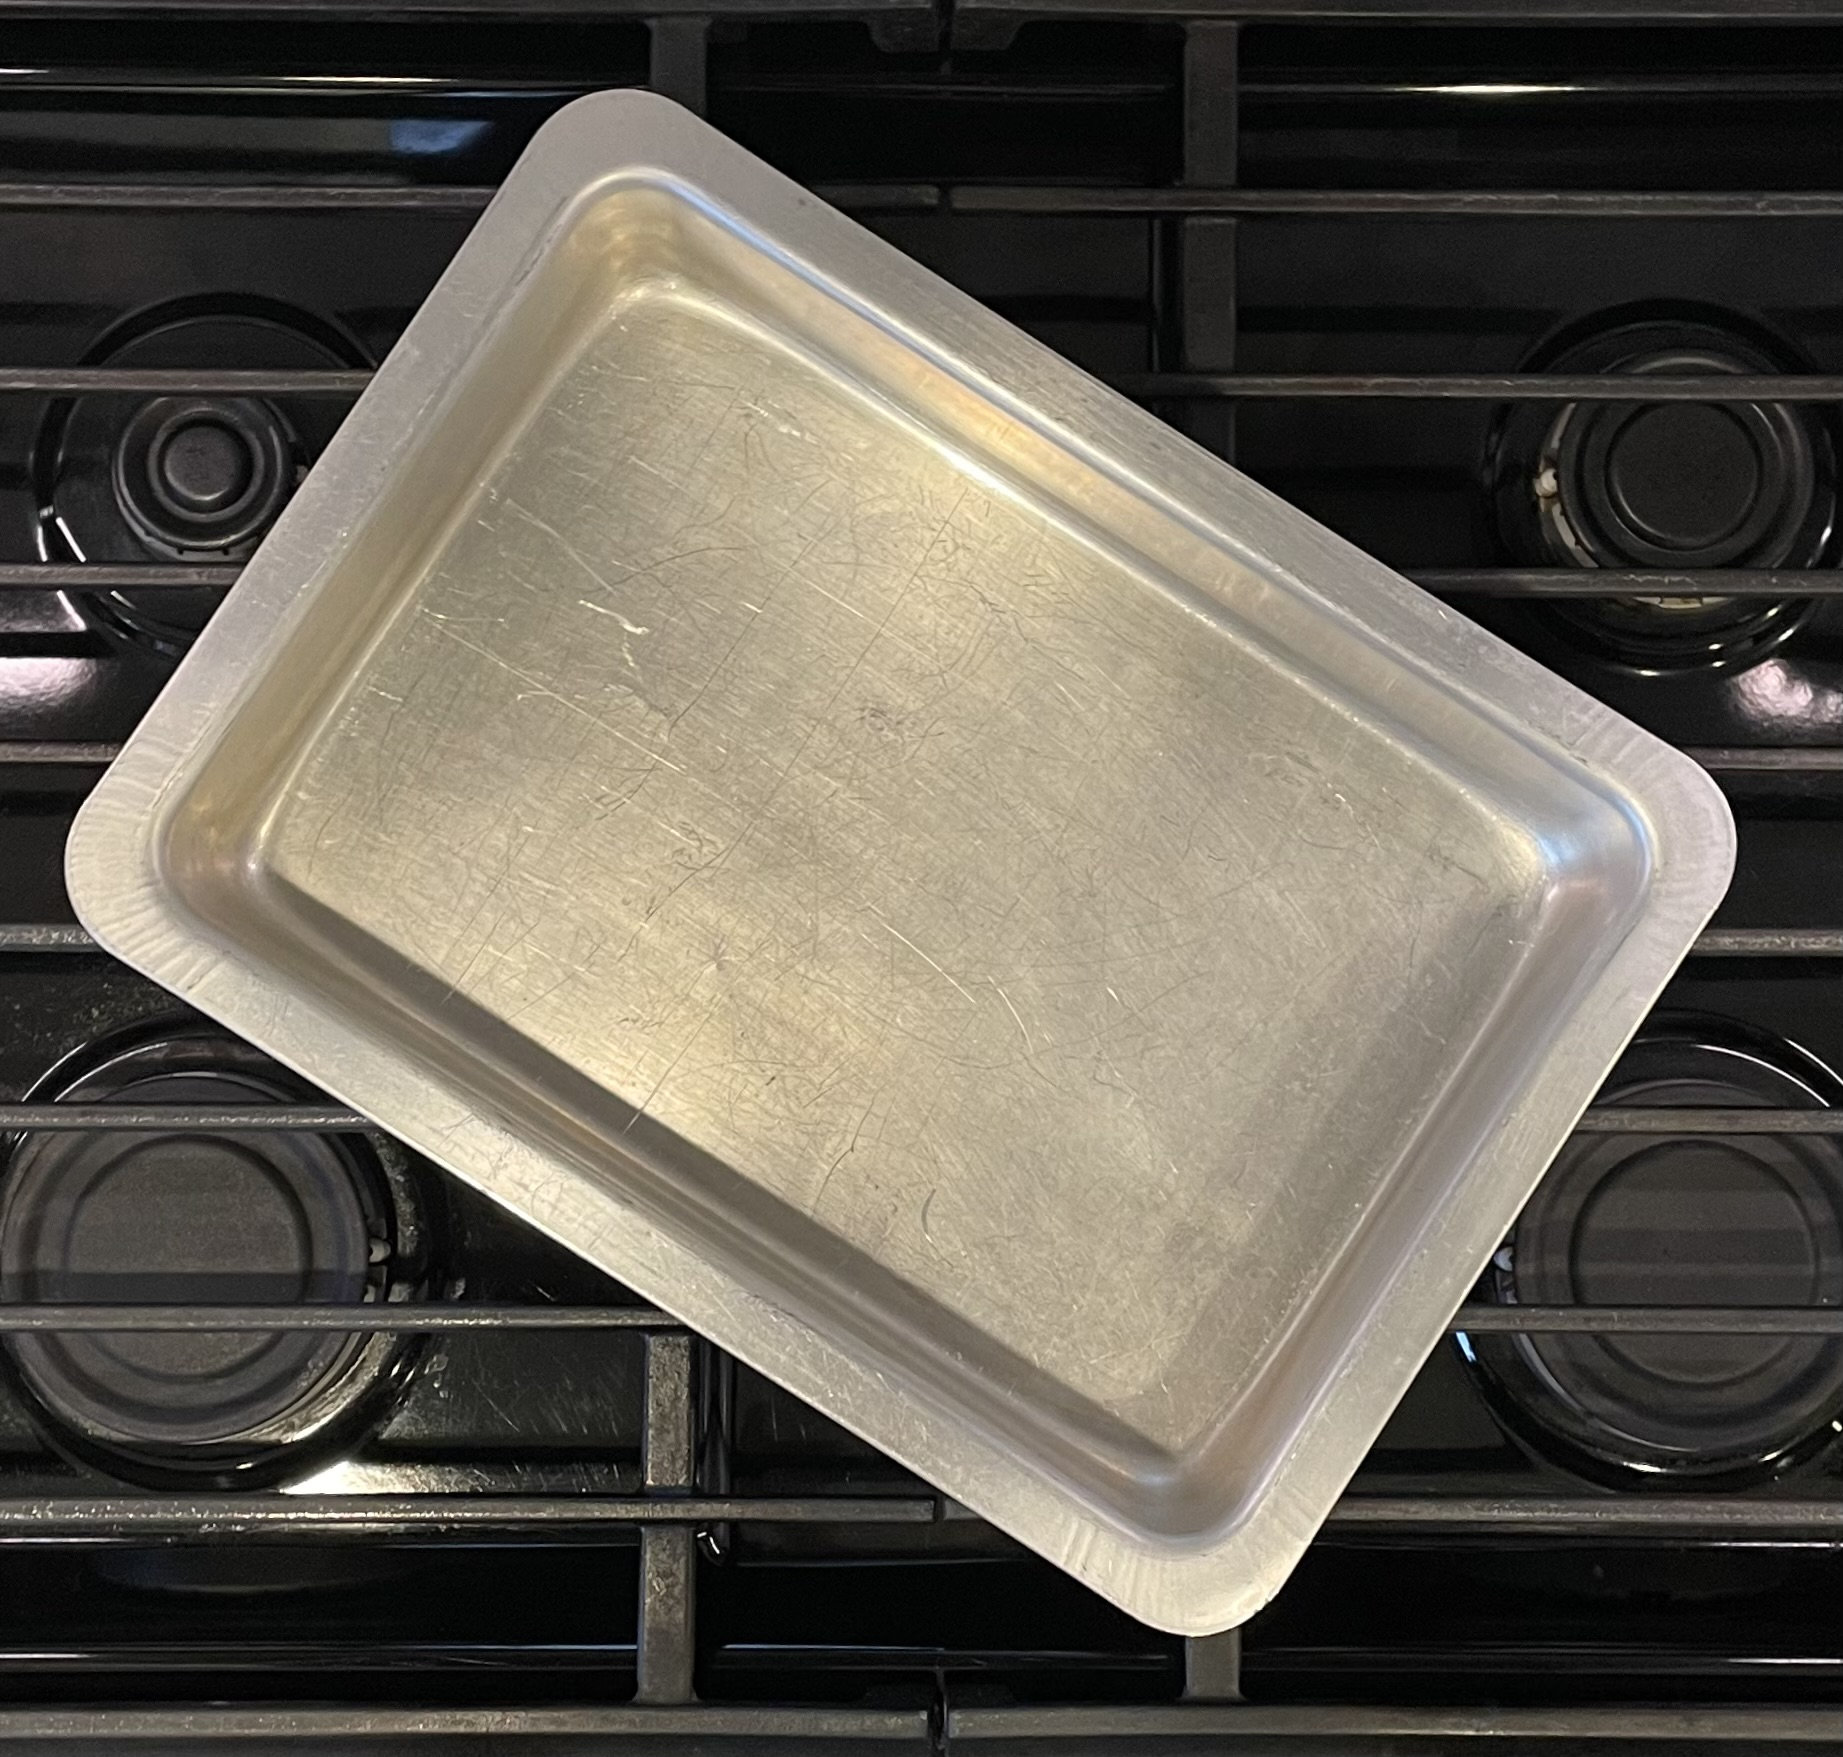 Wearever AirBake Cake Pan, Covered, 13 x 9 x 2-1/4-In. Covered